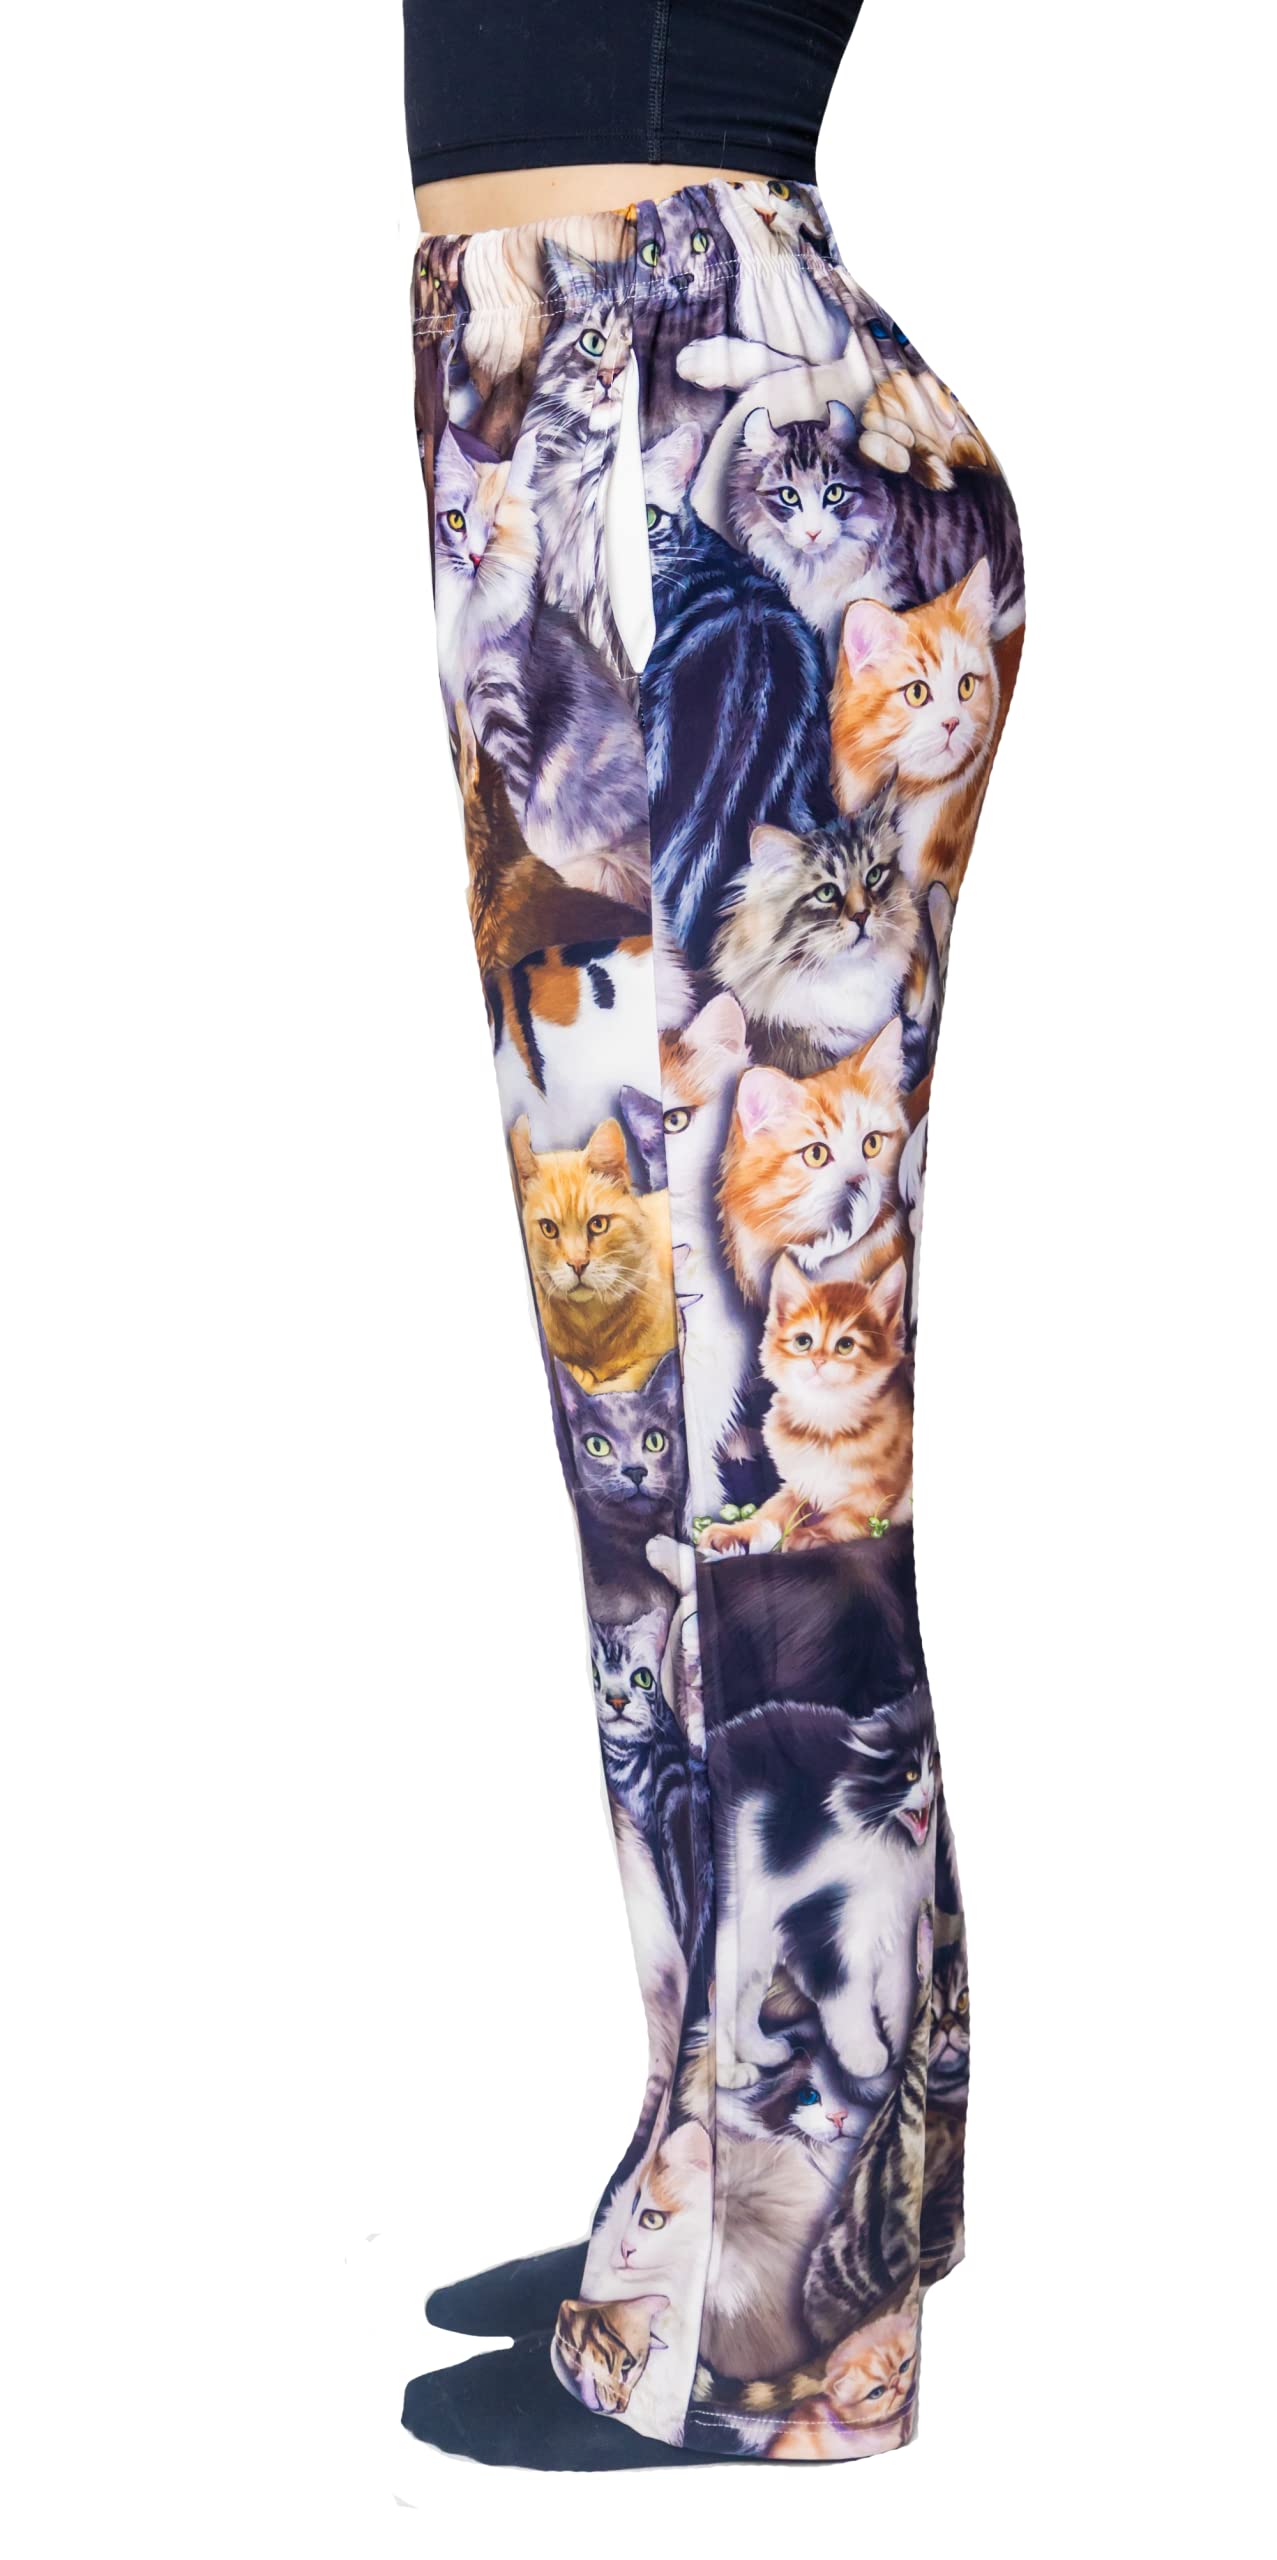 Waist down photo of model wearing All Over Cat pajama lounge pants side view (white background)